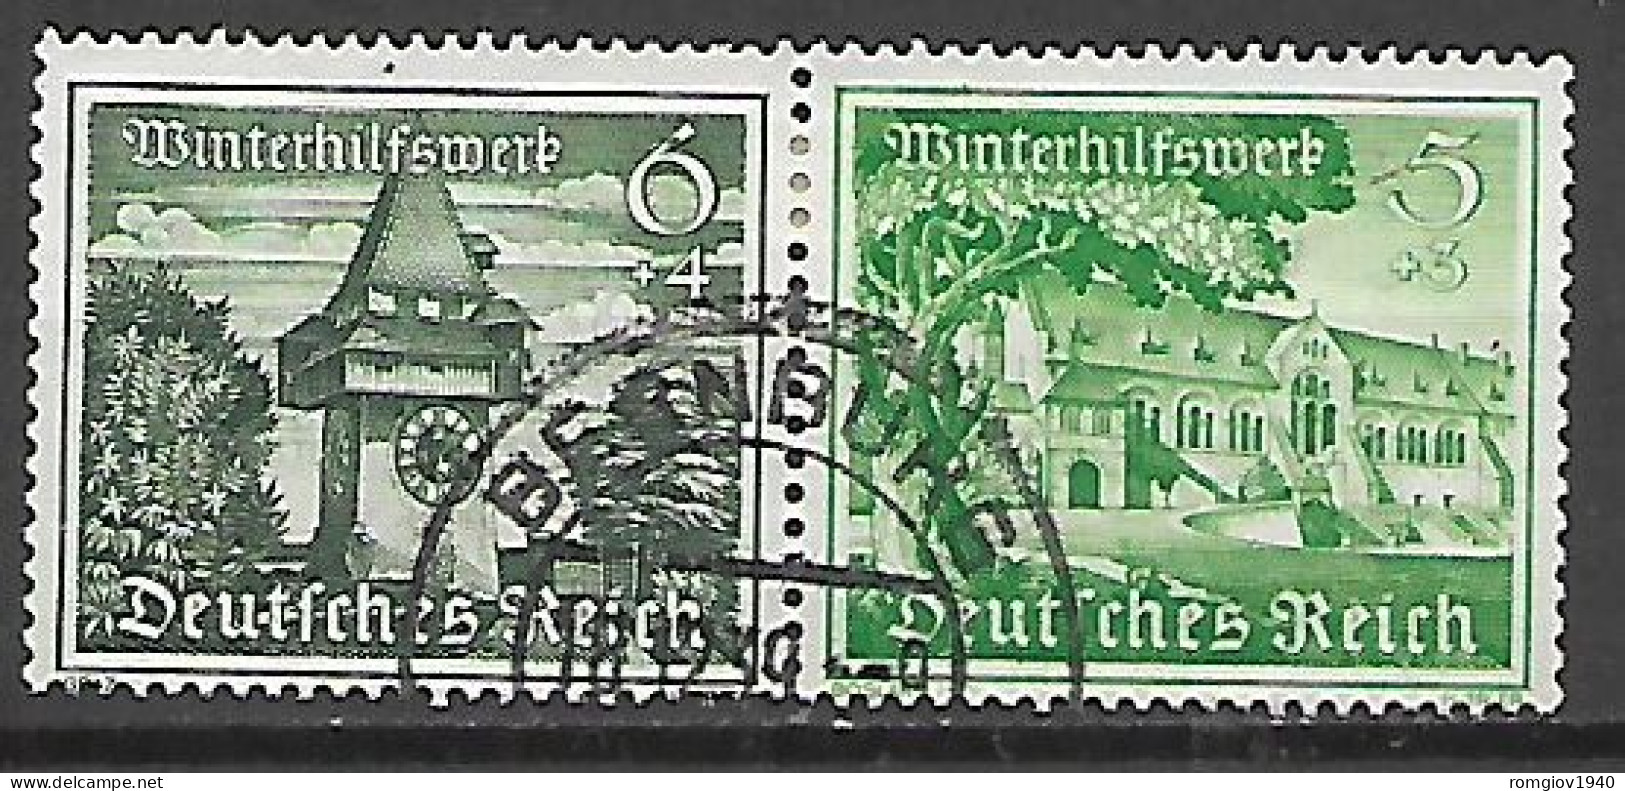 GERMANIA REICH TERZO REICH 1939 TETE.BECH   SOCCORSO INVERNALE YVERT. 656a  USATA VF - Used Stamps